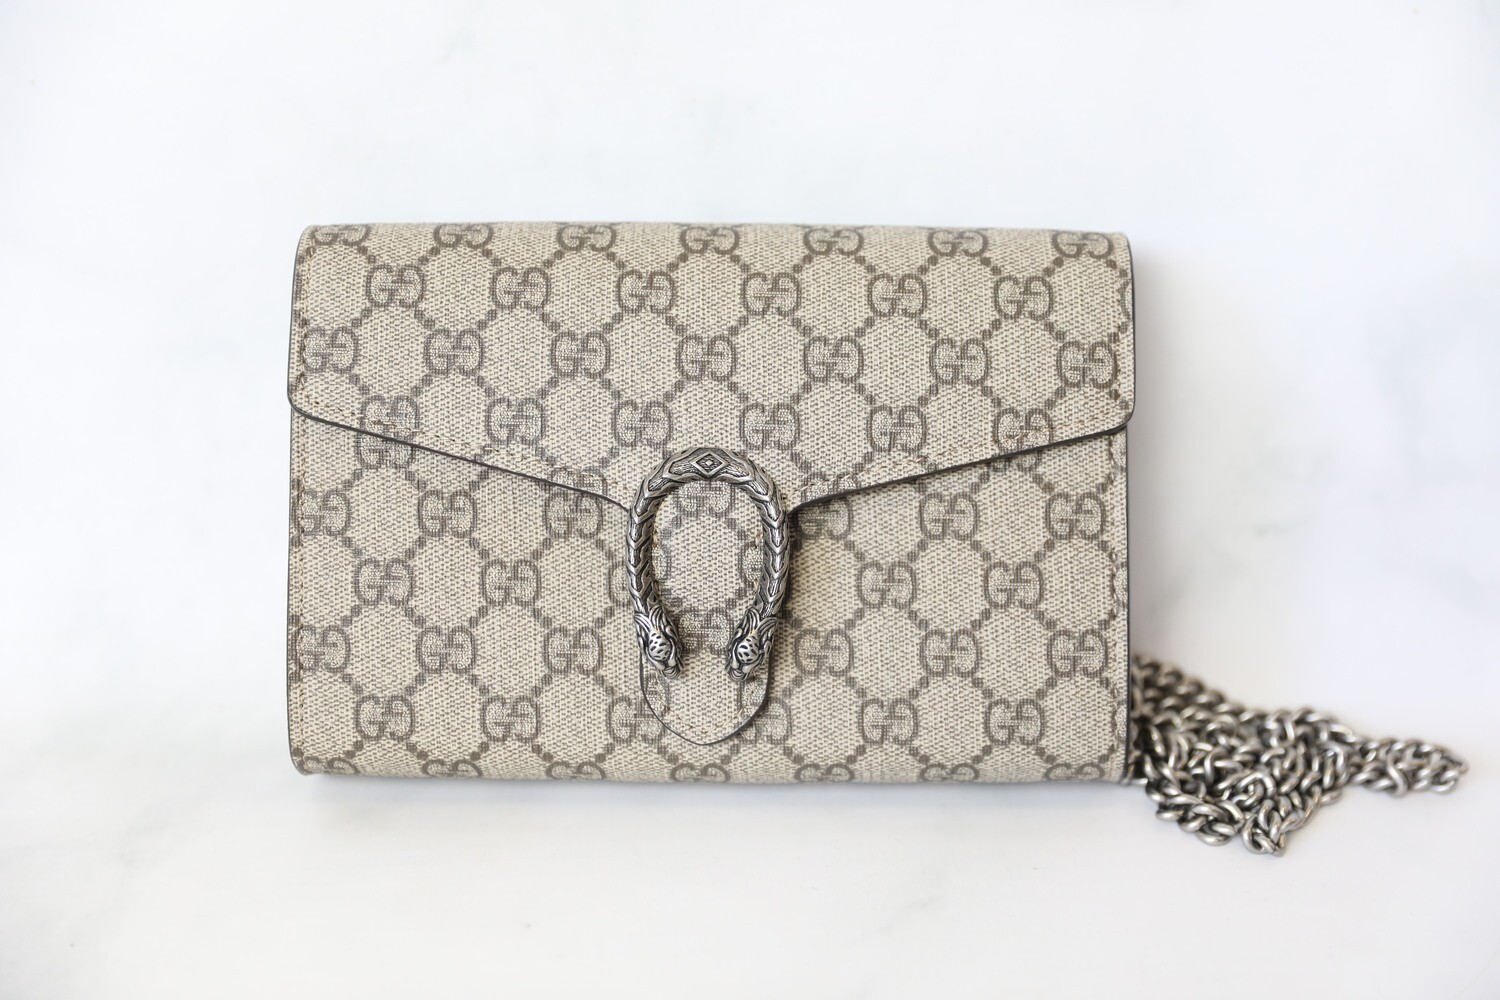 Gucci Dionysus Wallet on Chain, Monogram Canvas, New in Box WA001